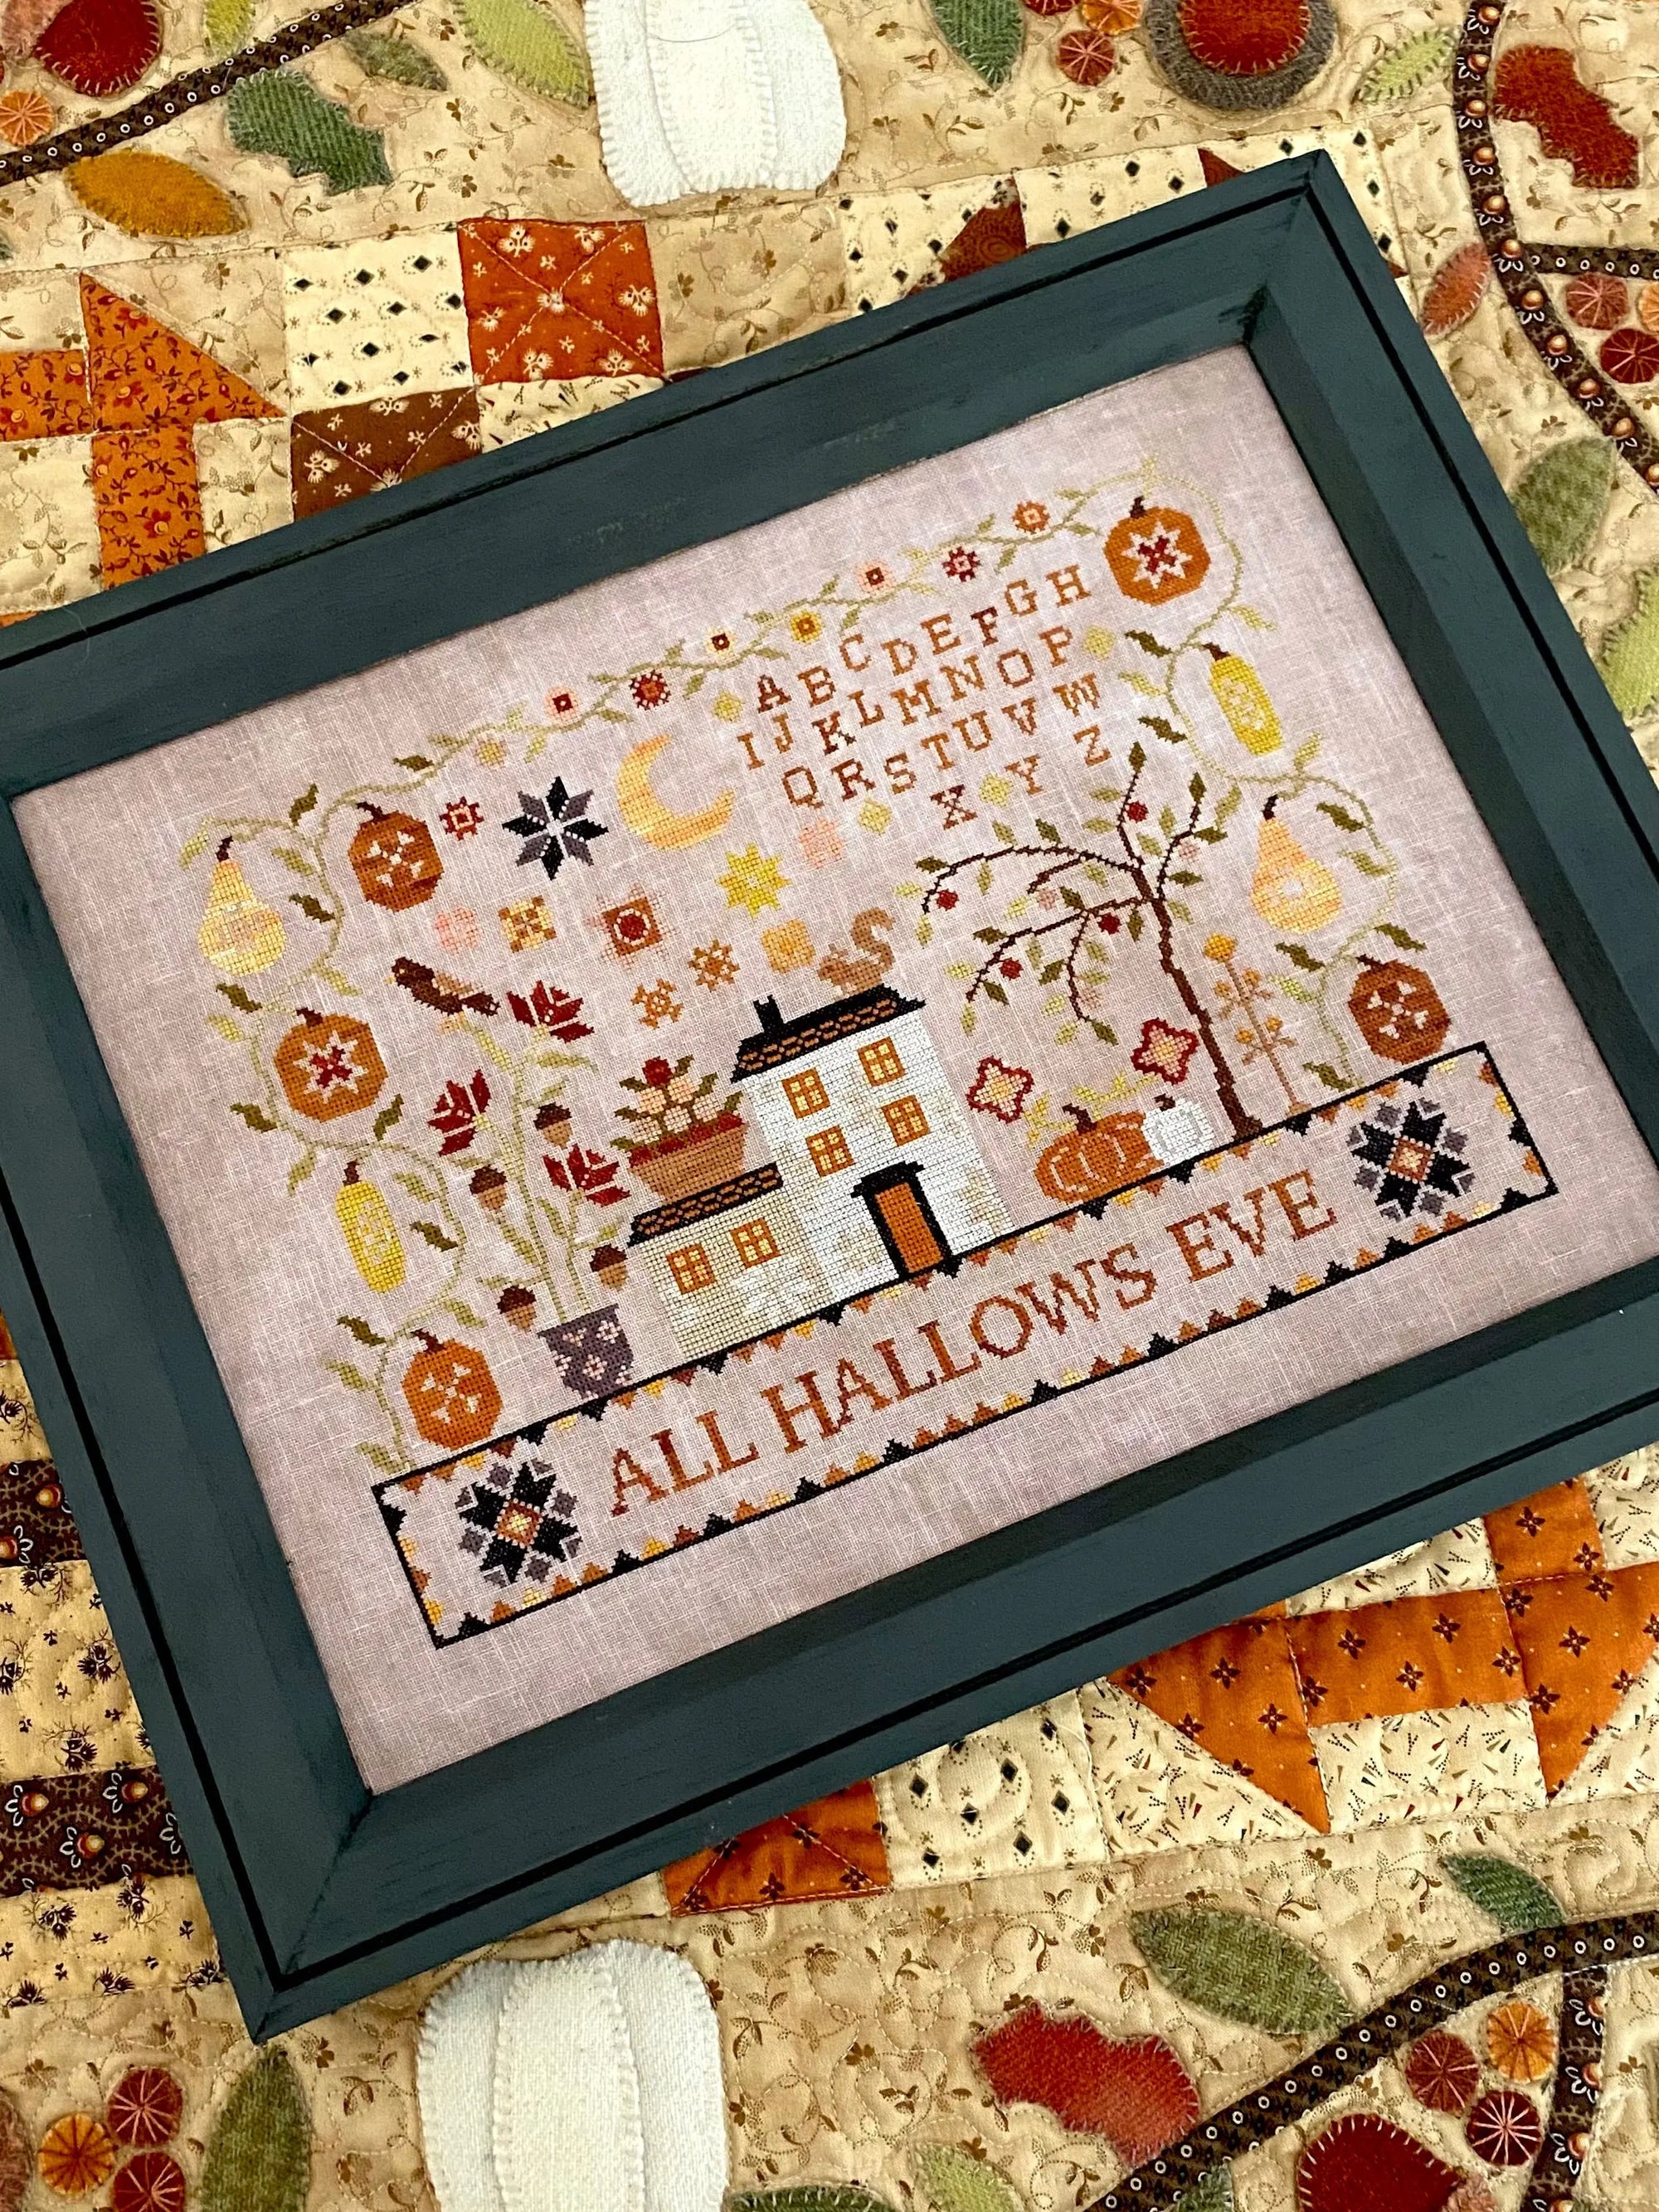 All Hallows Eve by Blueberry Ridge Design (Pre-order) Blueberry Ridge Designs